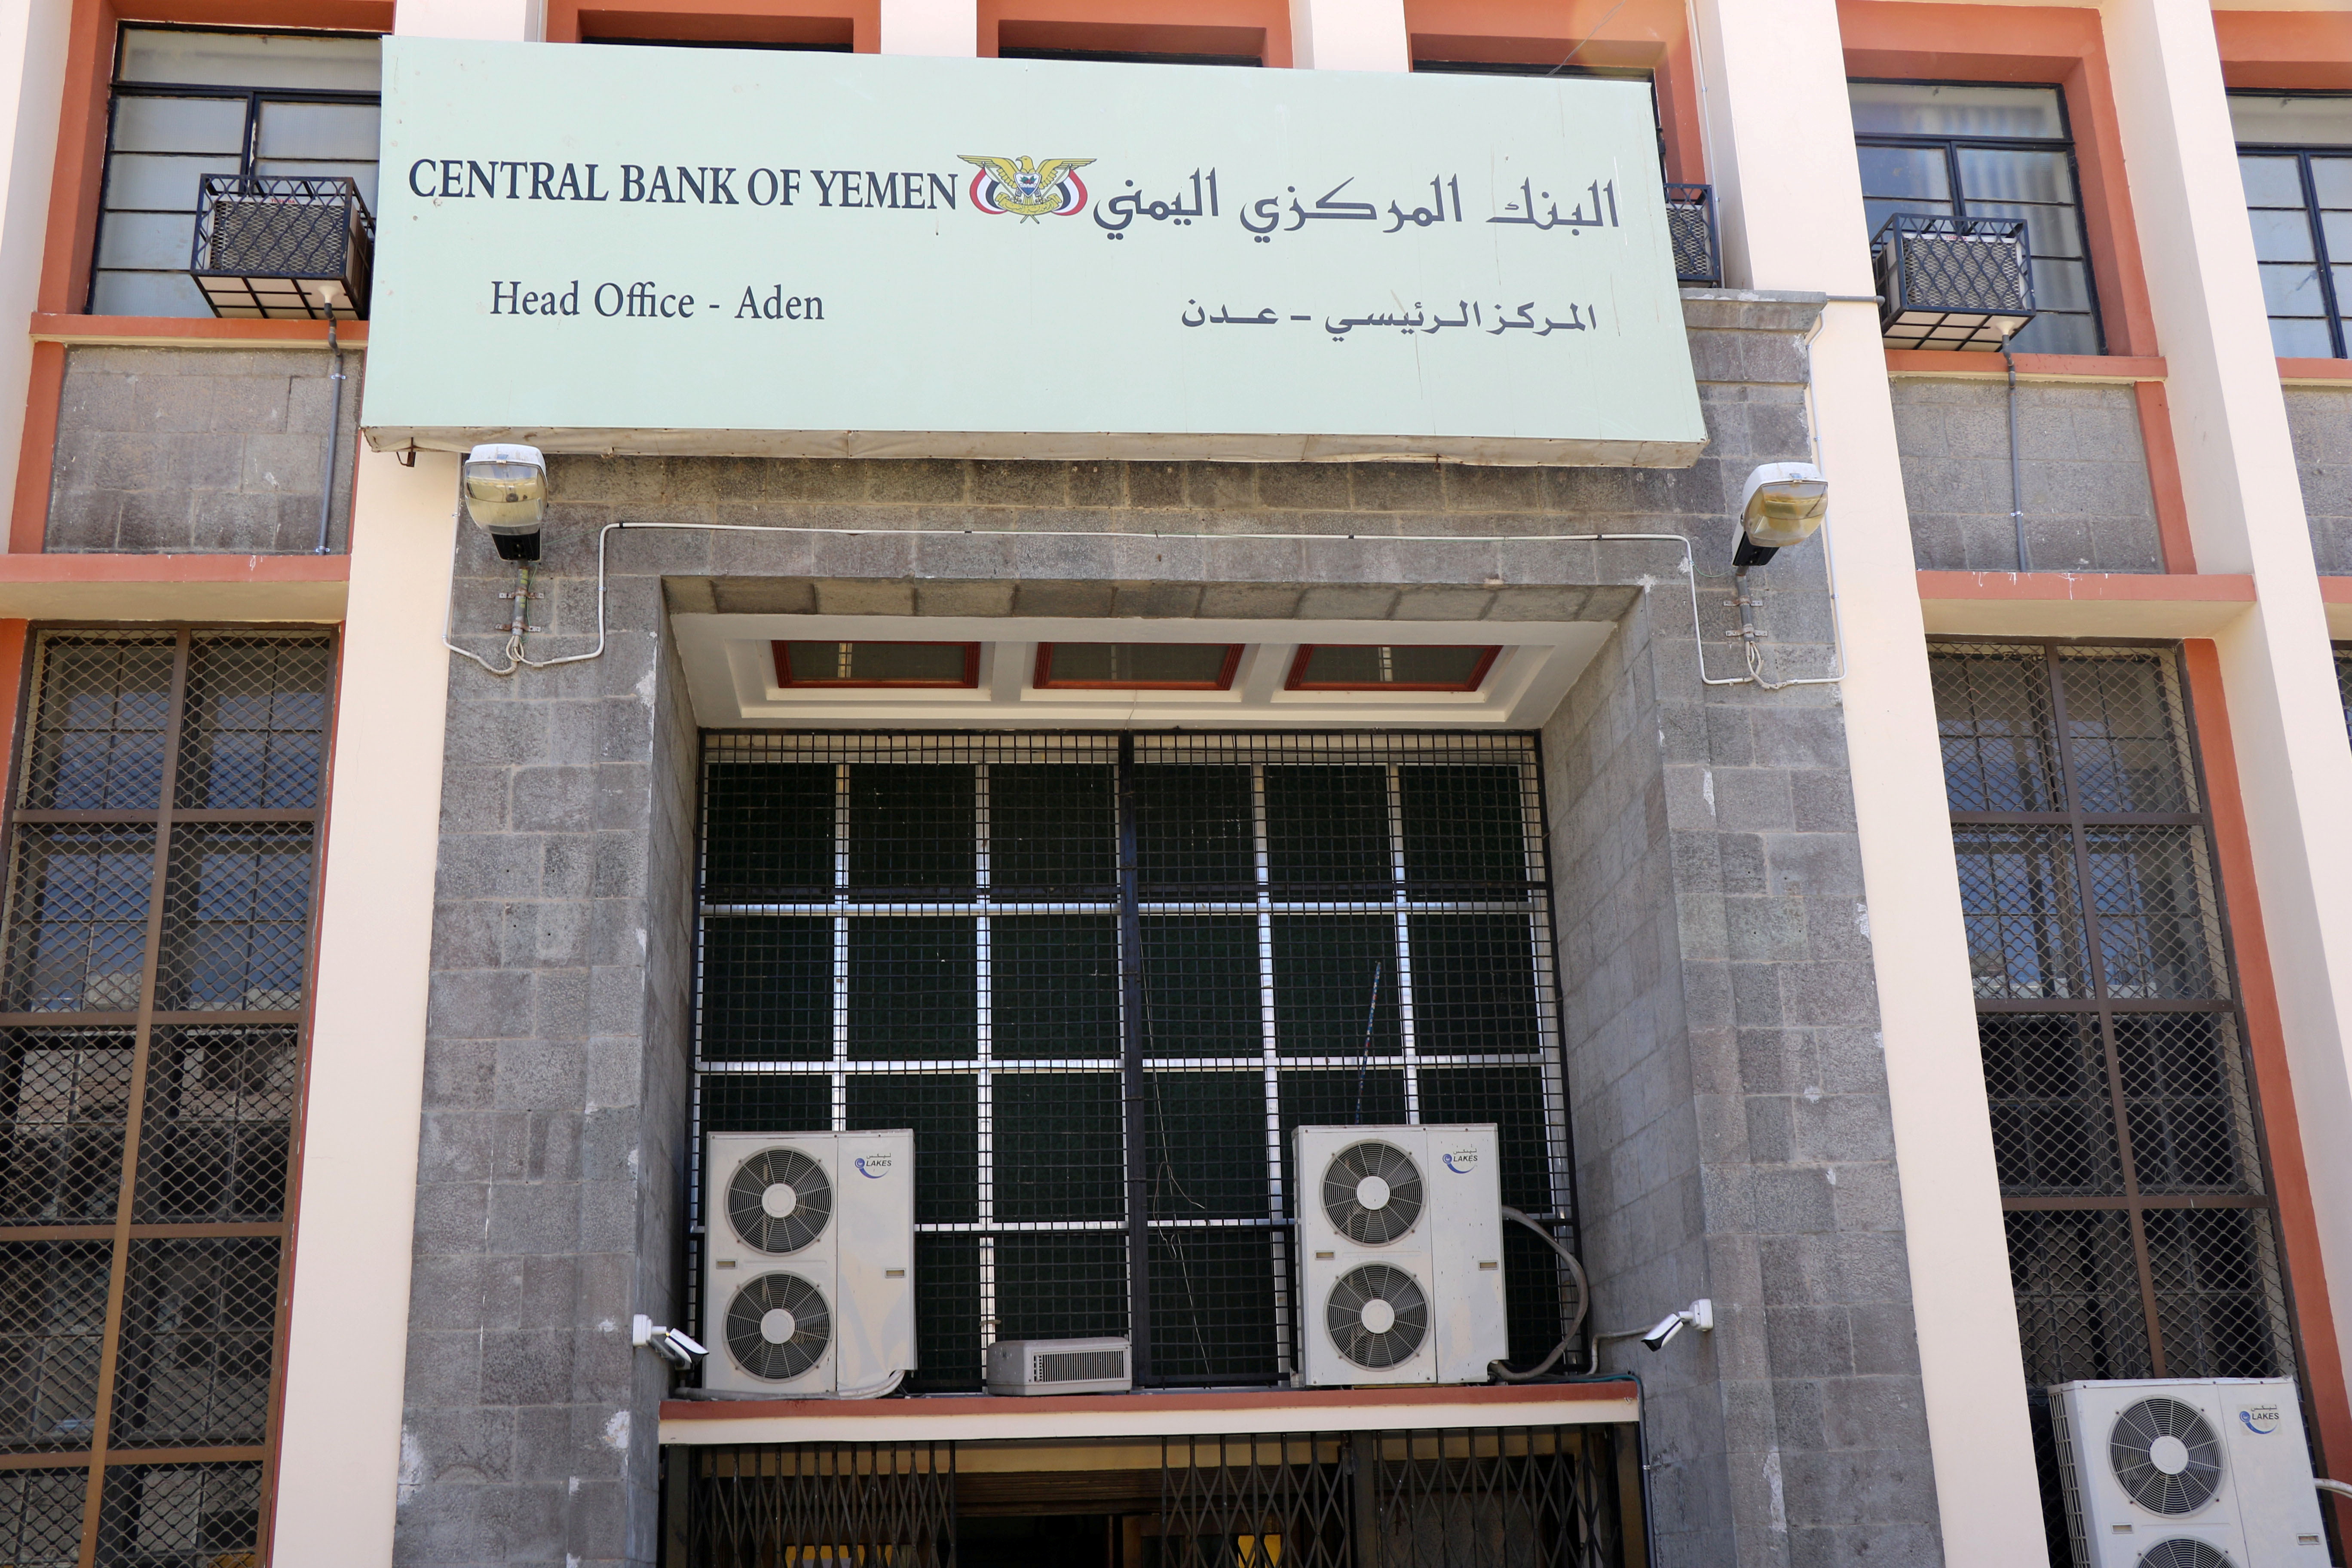 A view of the Central Bank of Yemen in Aden